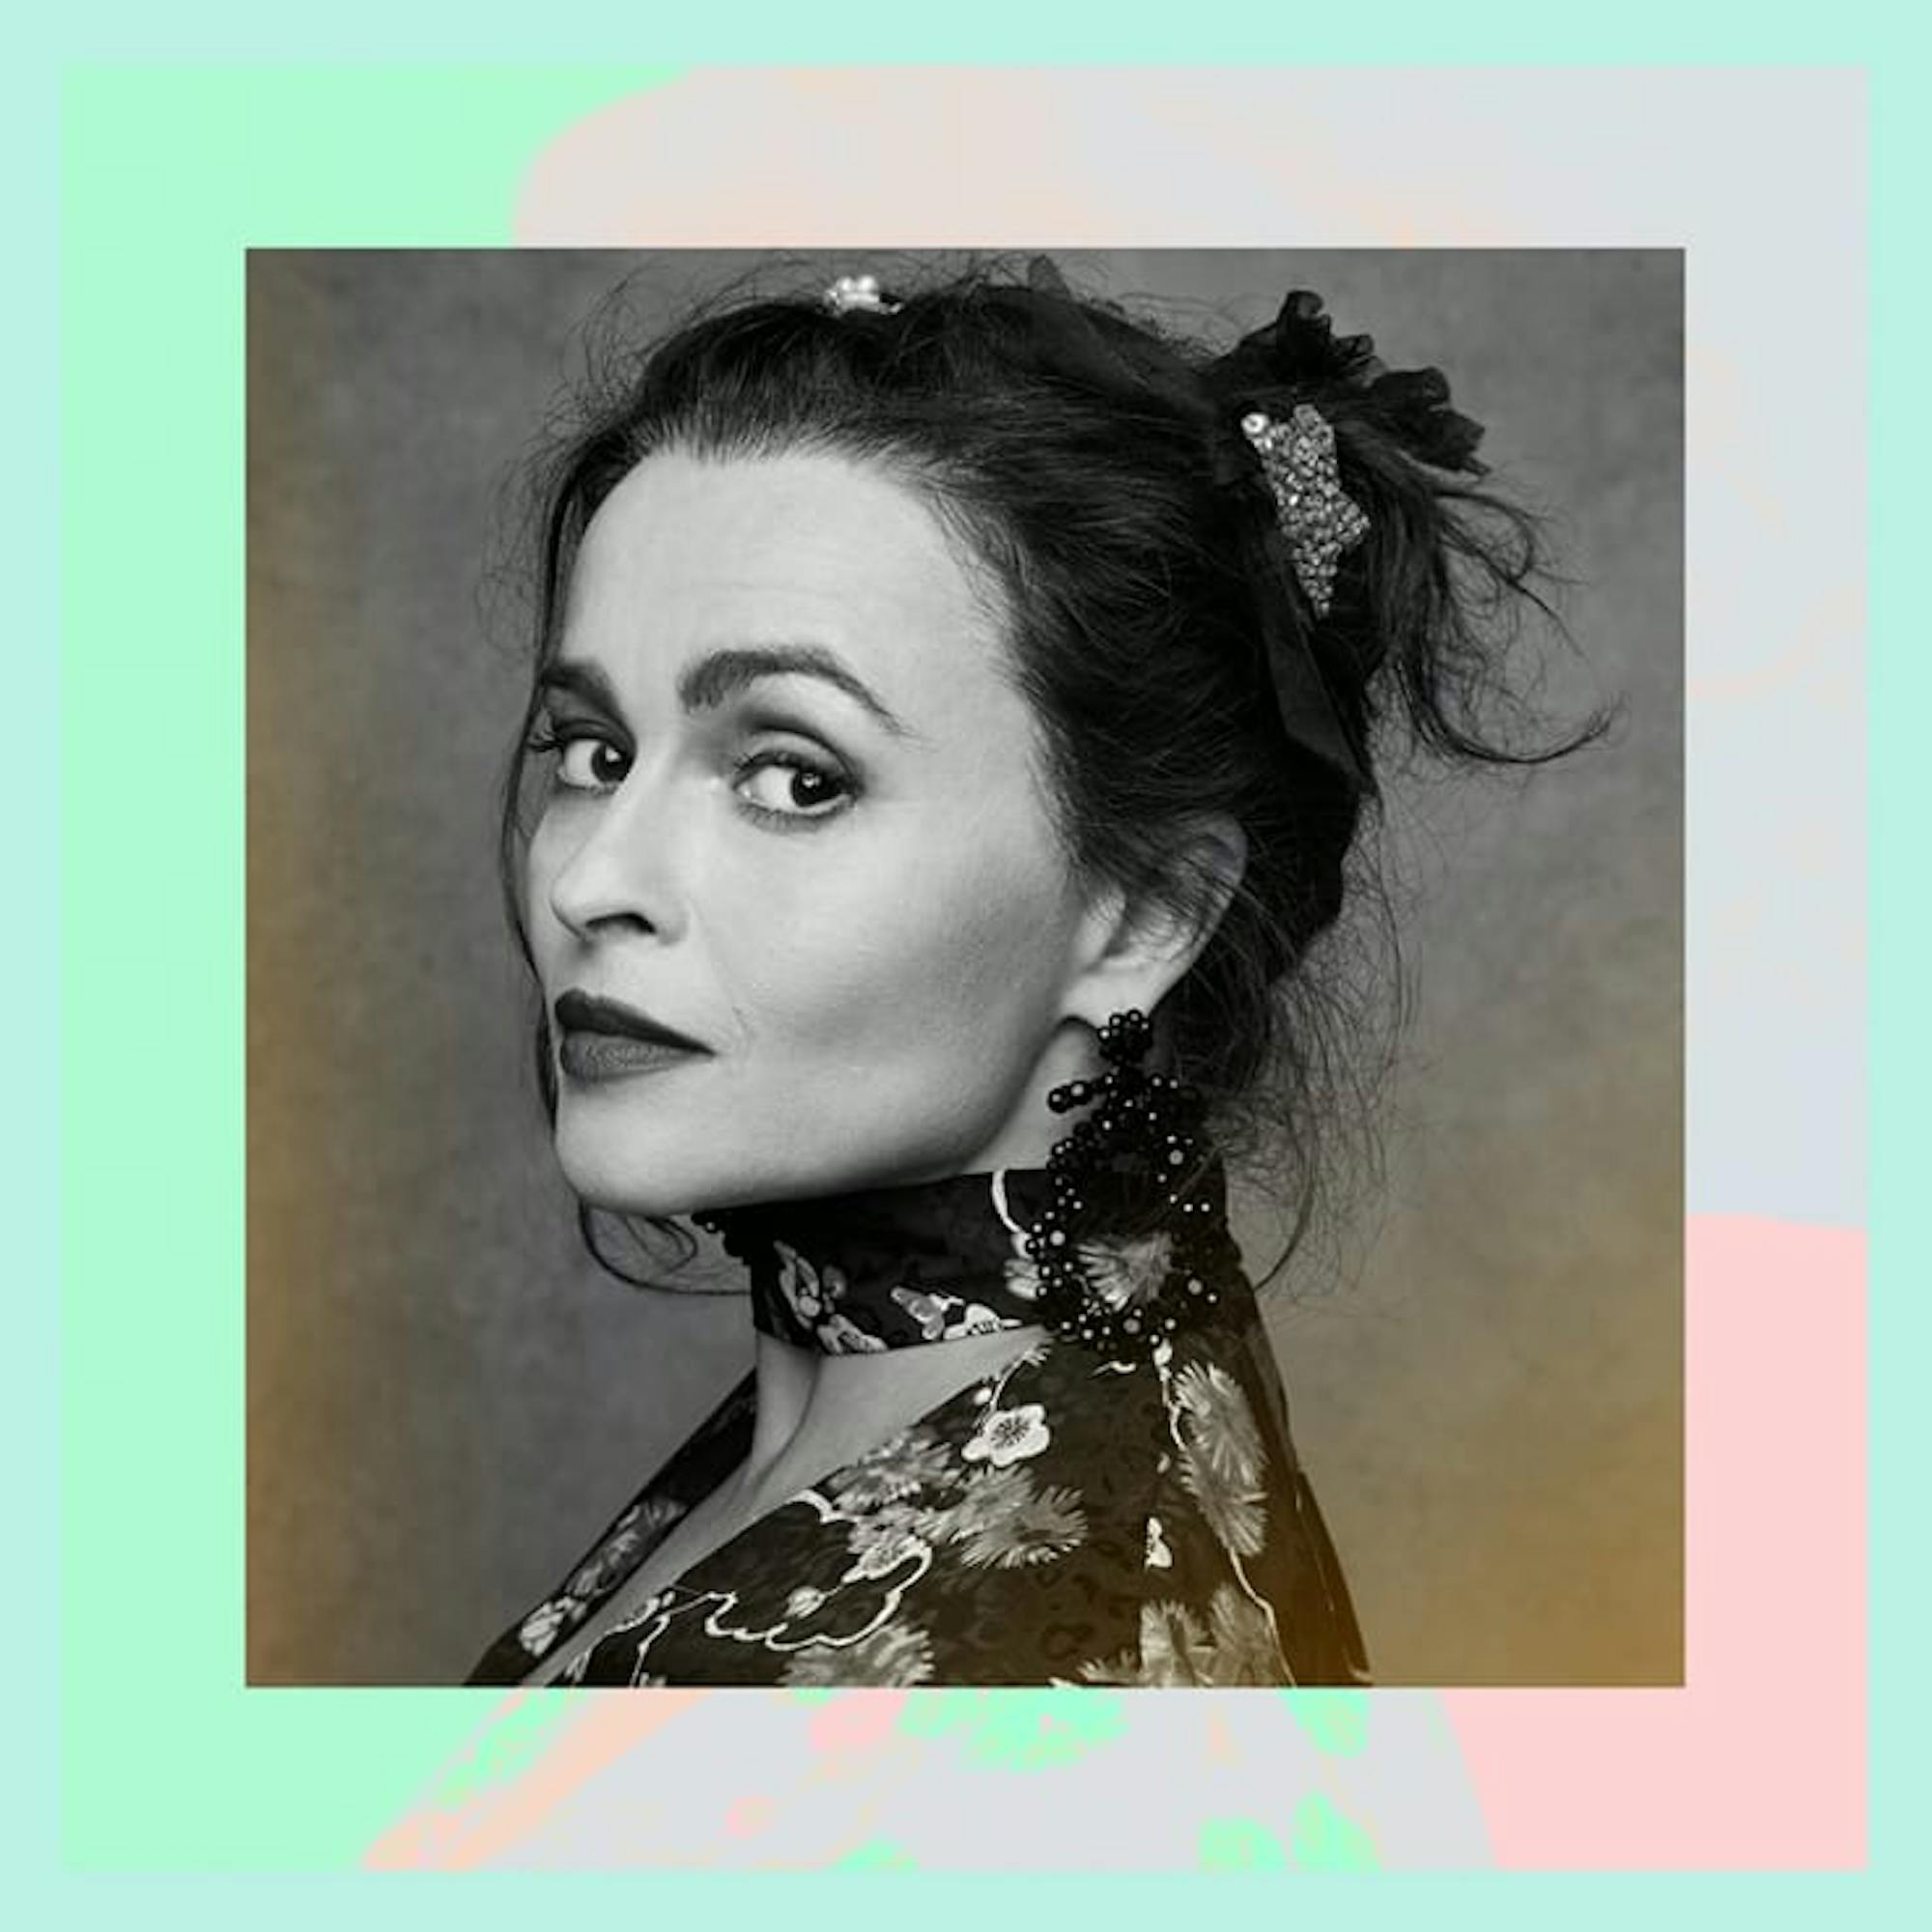 Helena Bonham Carter: Supporting actress in a drama series, The Crown